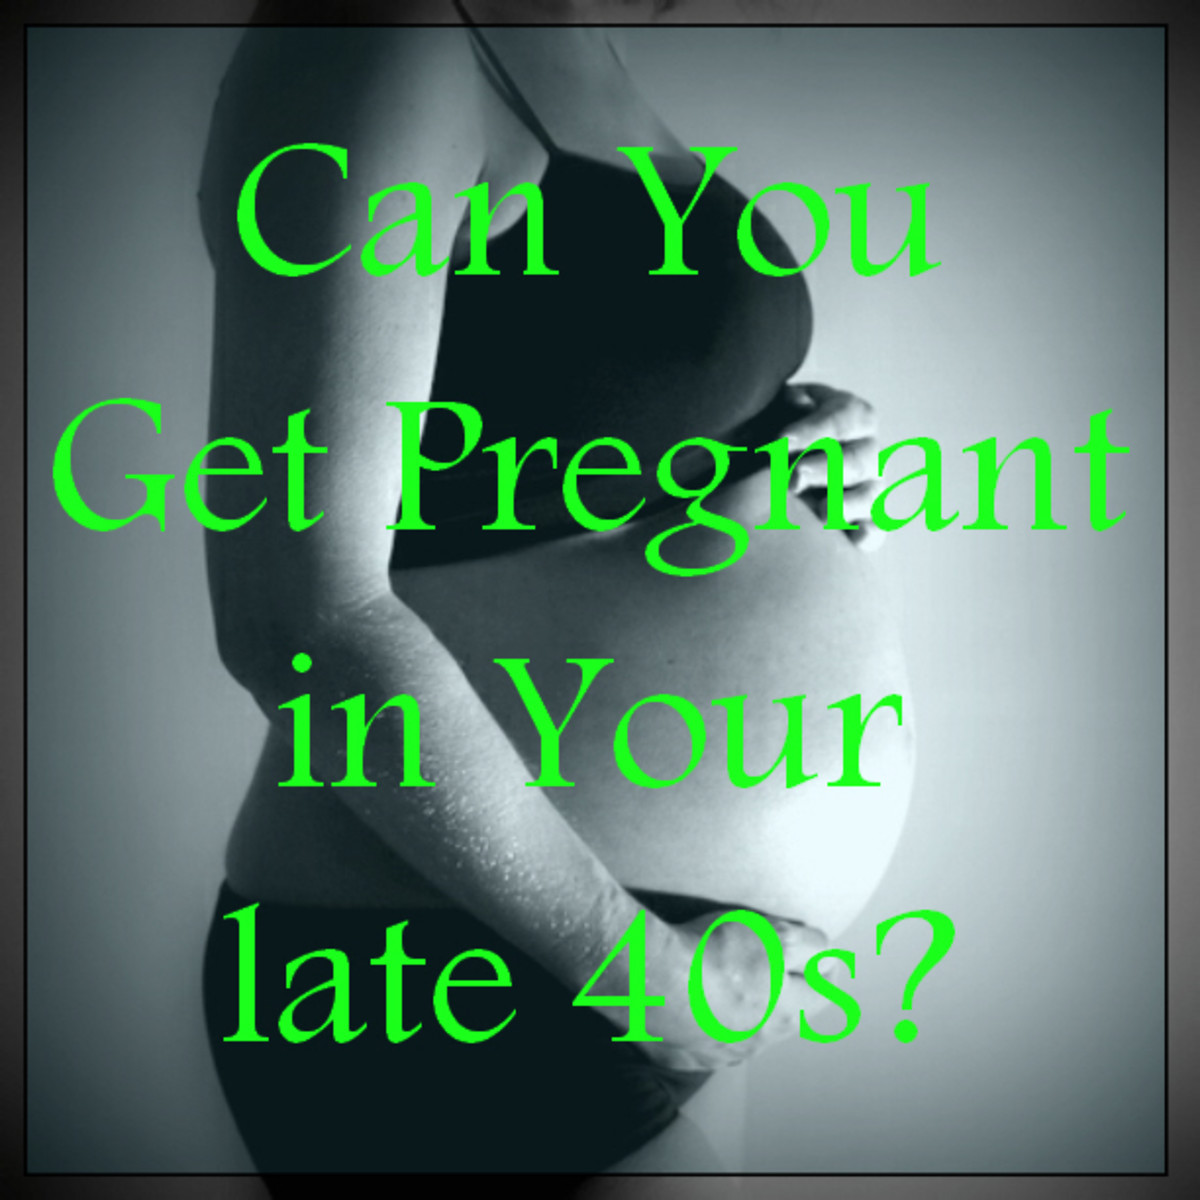 What Are The Chances of Getting Pregnant Over 45?